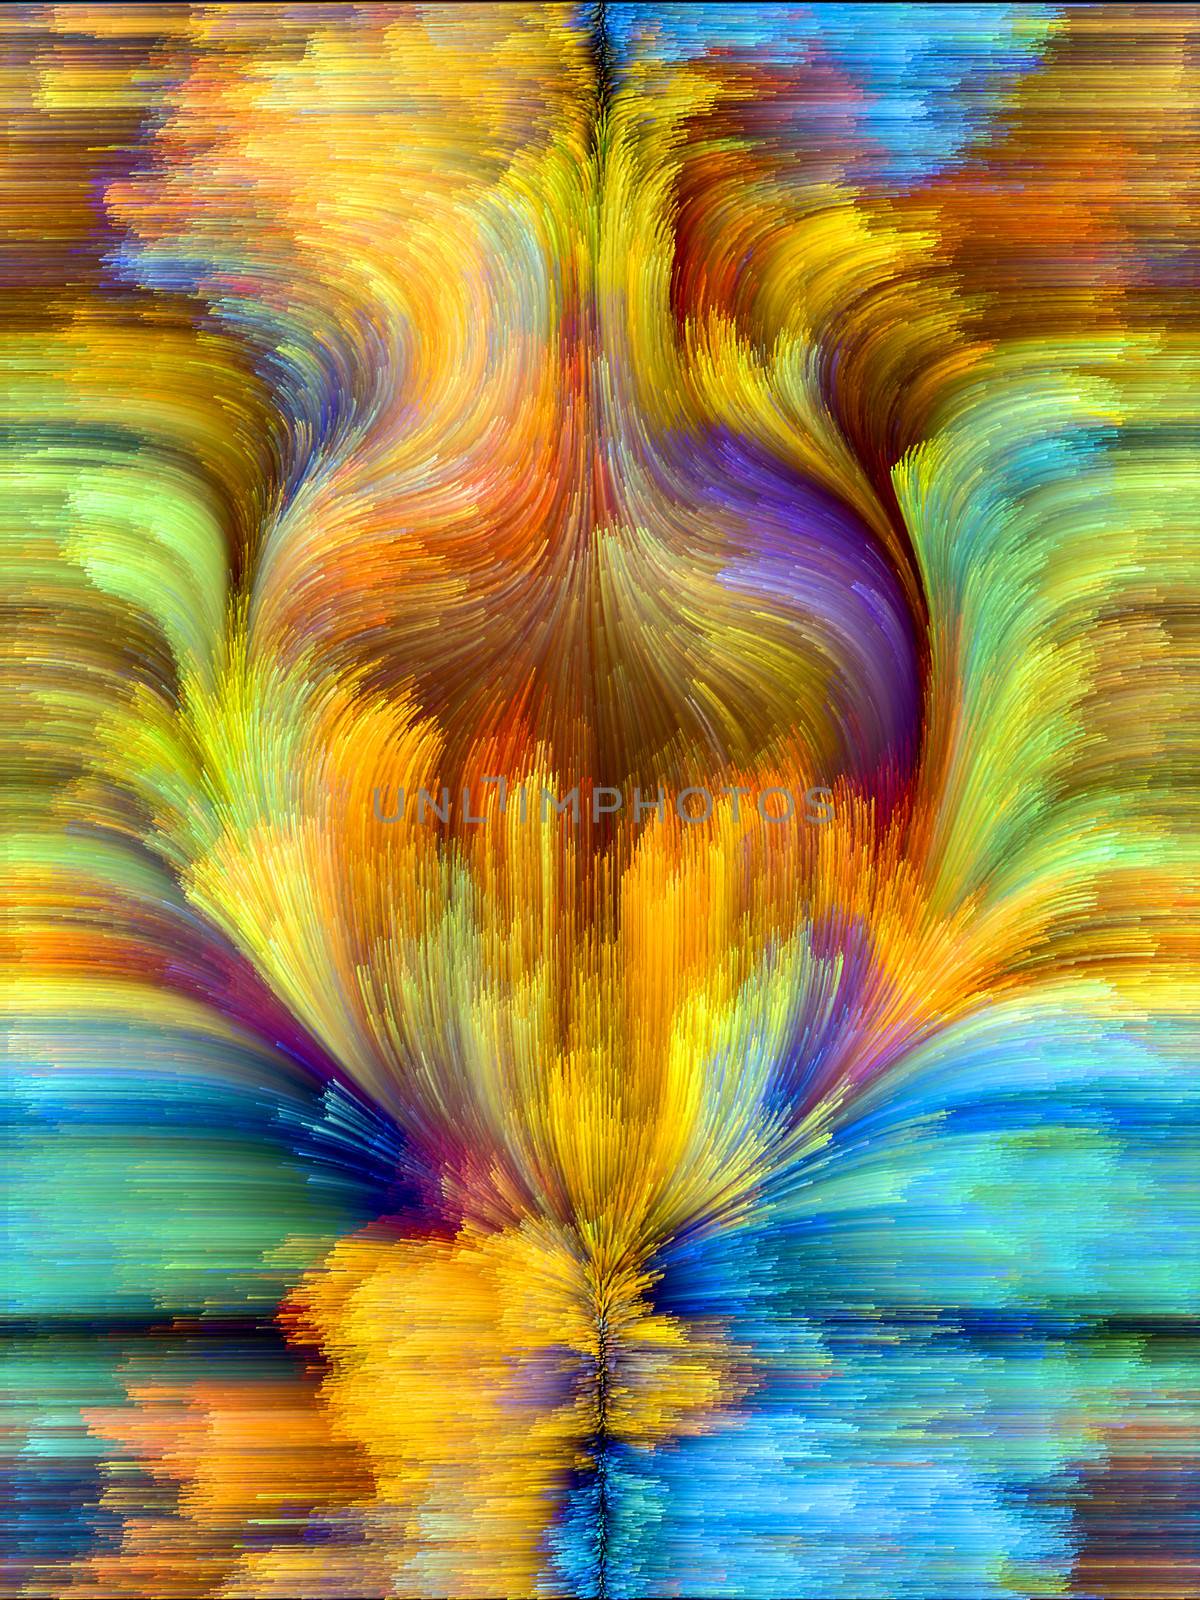 Colors In Bloom series. Backdrop of fractal color textures on the subject of imagination, creativity and design